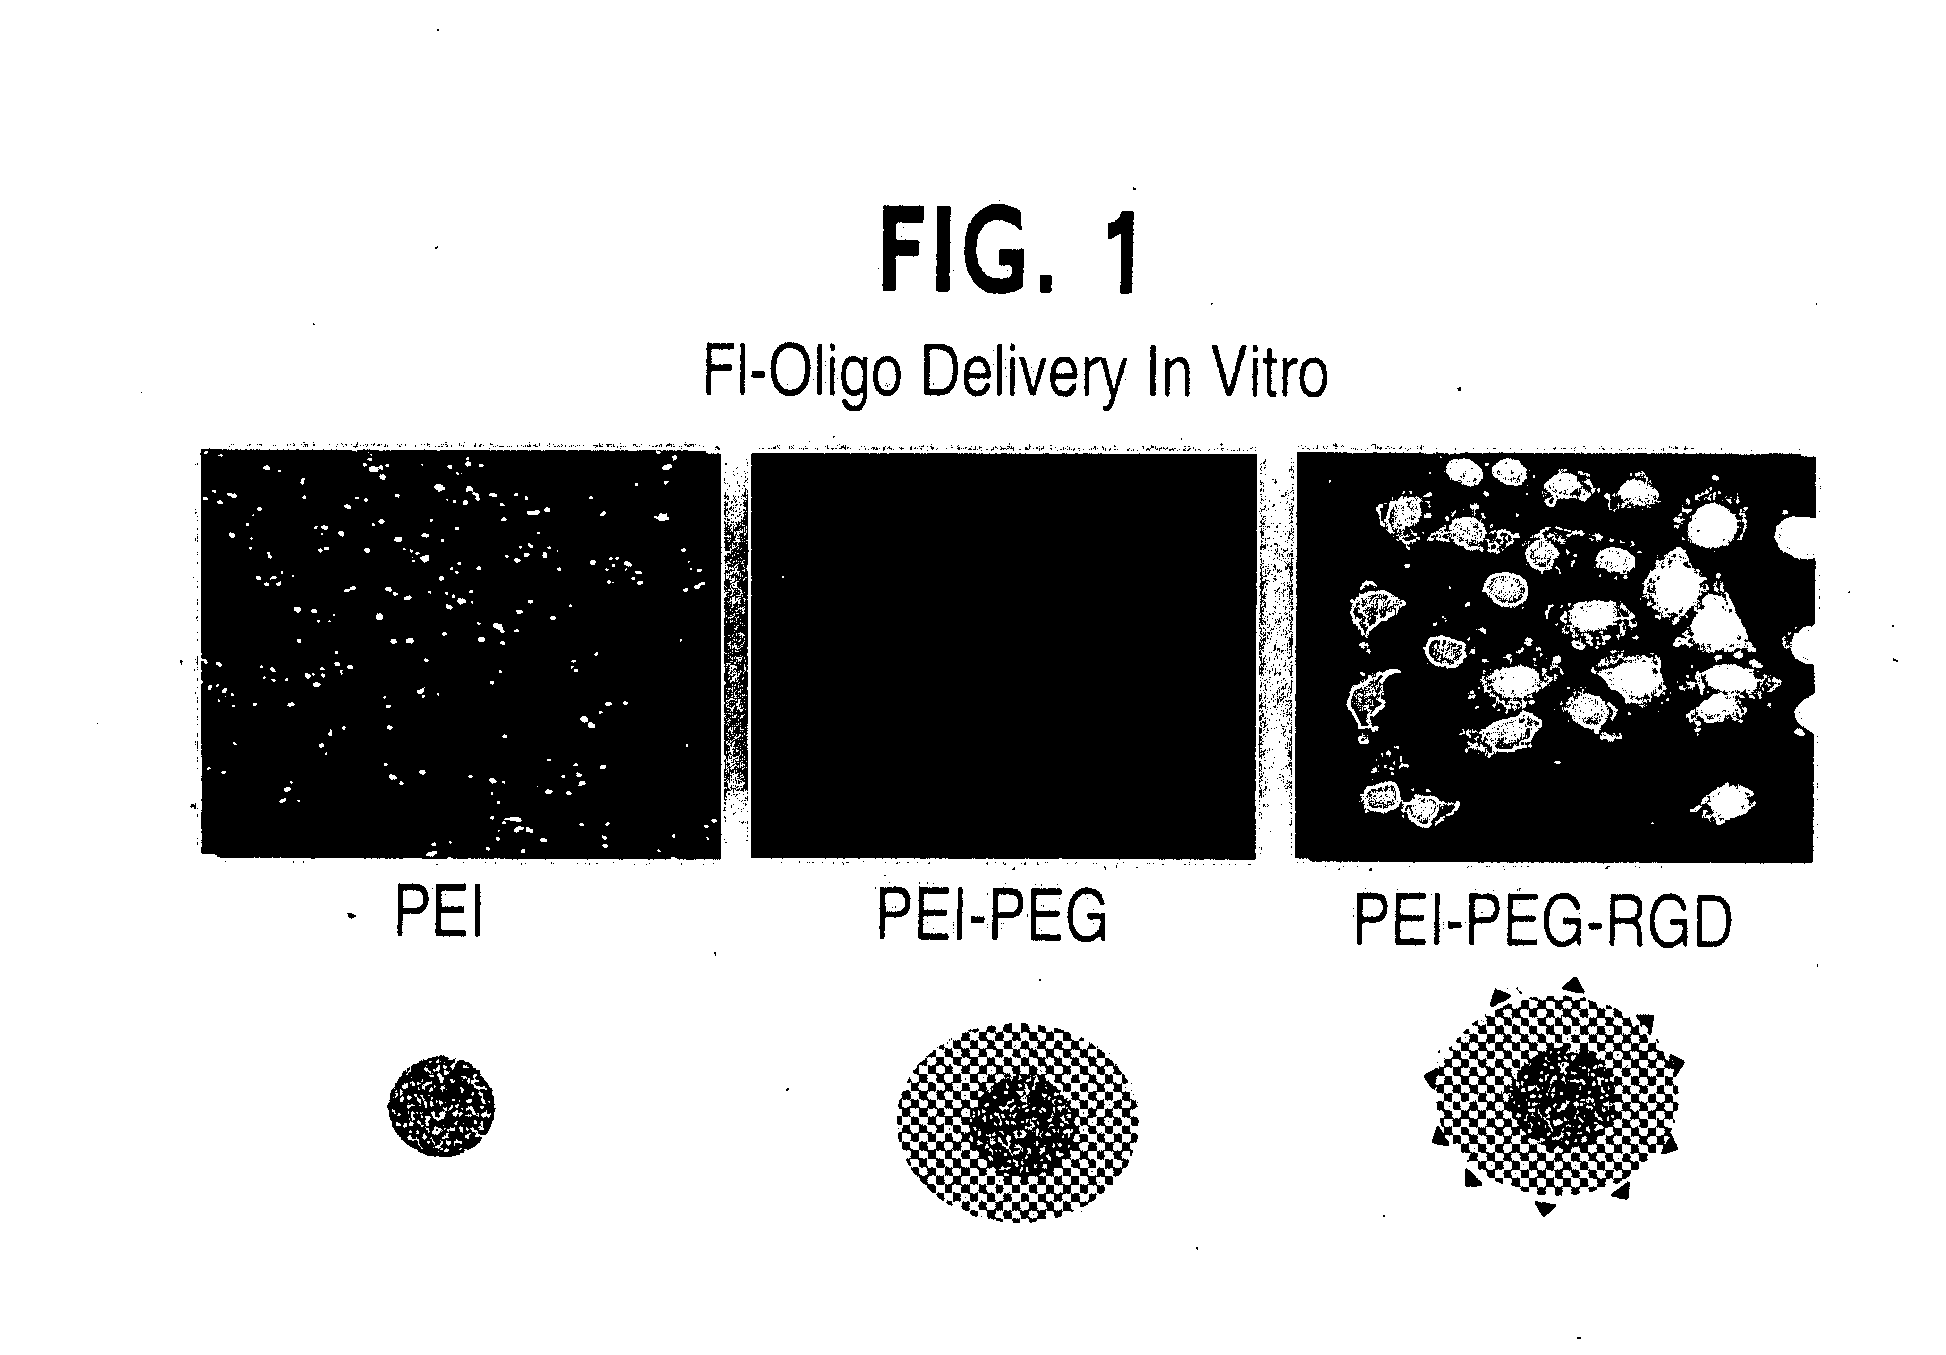 Therapeutic methods for nucleic acid delivery vehicles